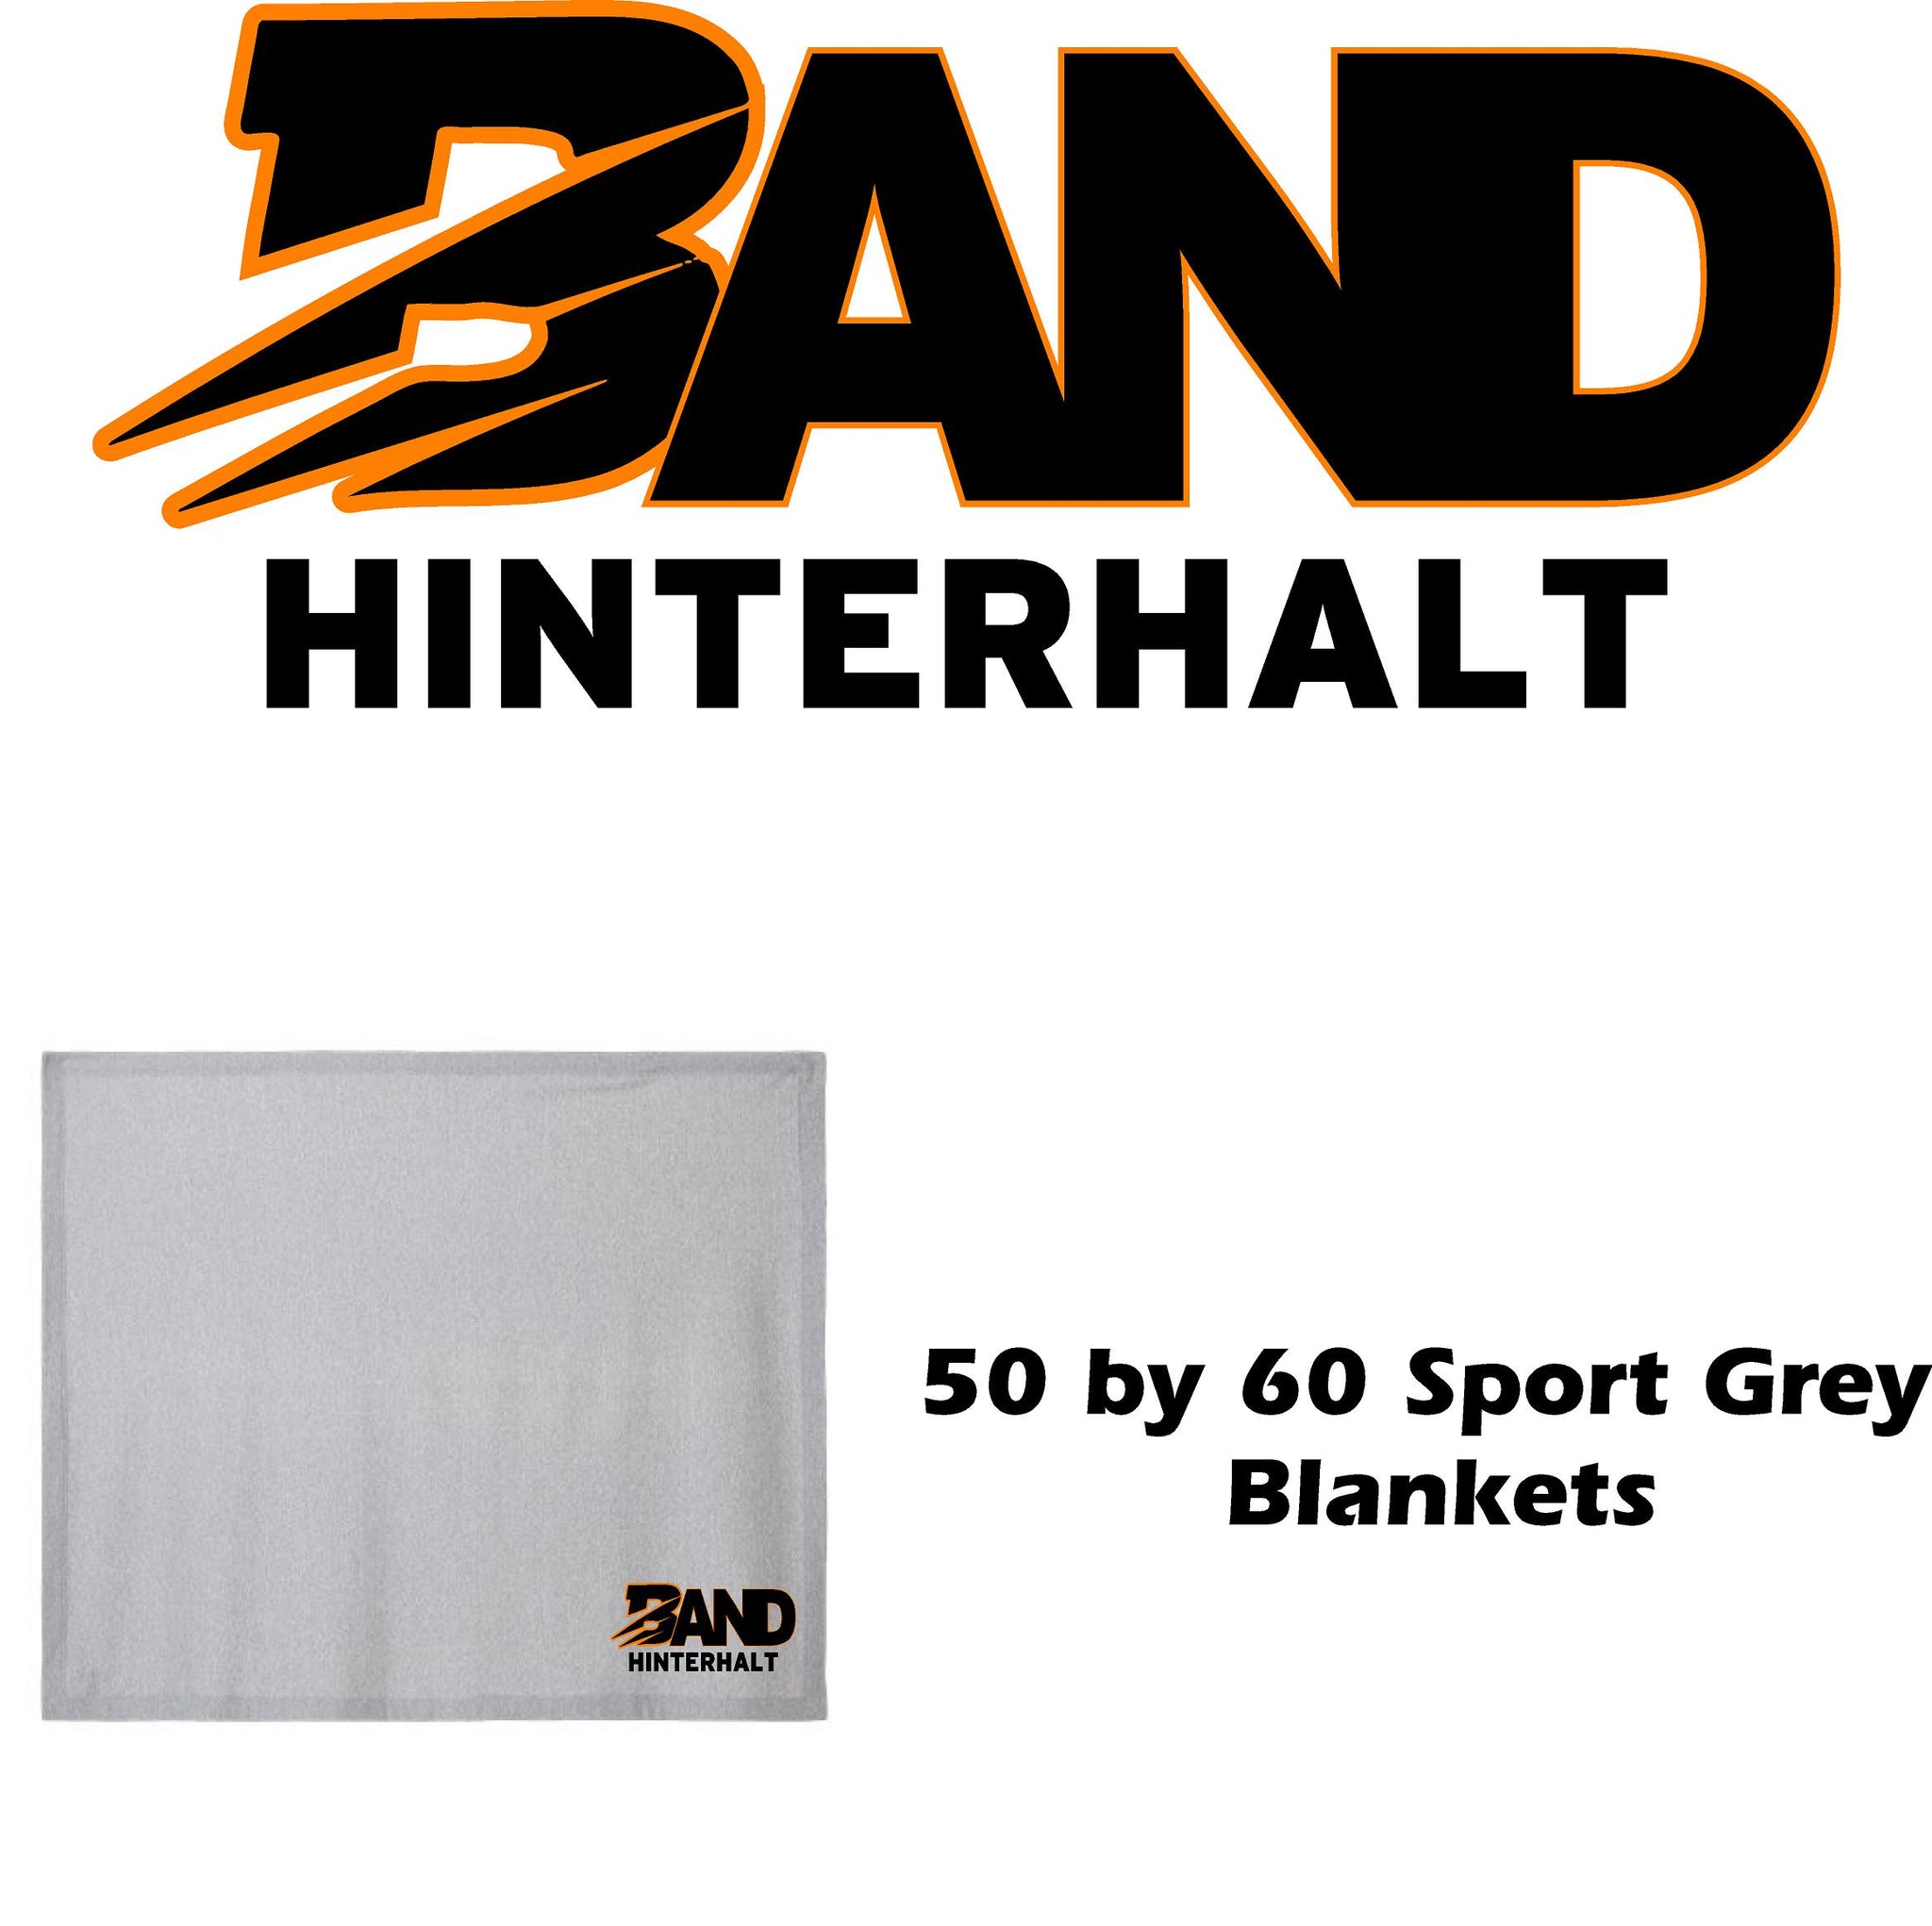 Band Blankets and Decals